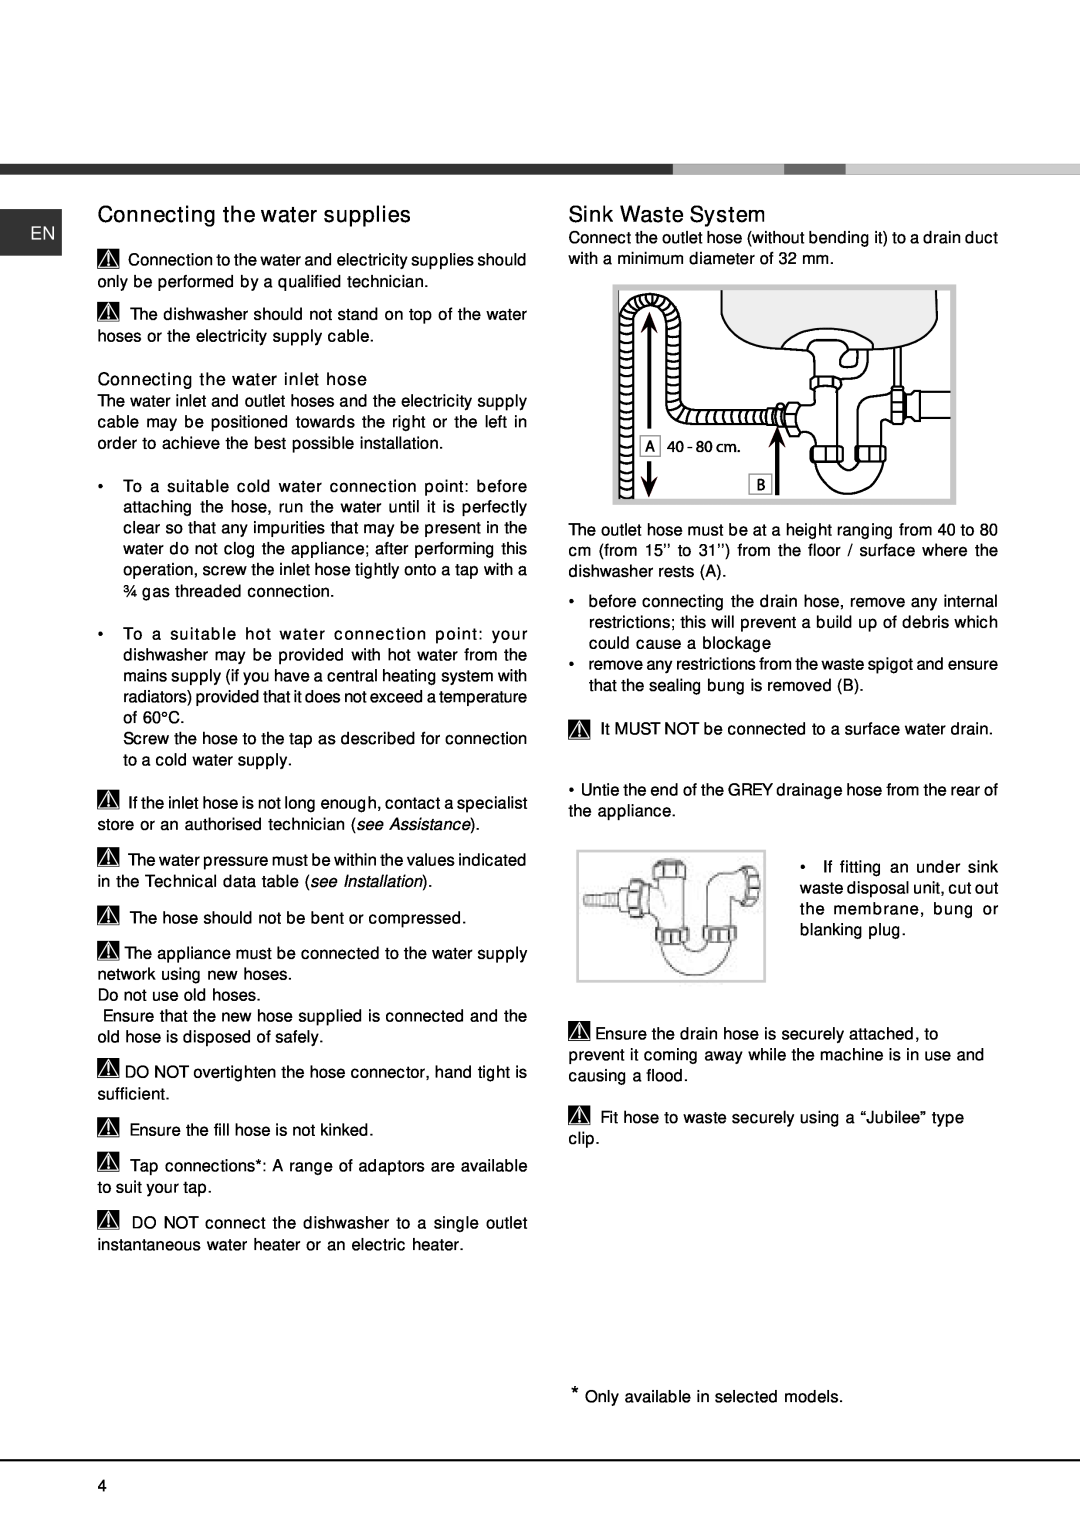 Hotpoint FDEF 4101 manual Connecting the water supplies, Sink Waste System, Connecting the water inlet hose 